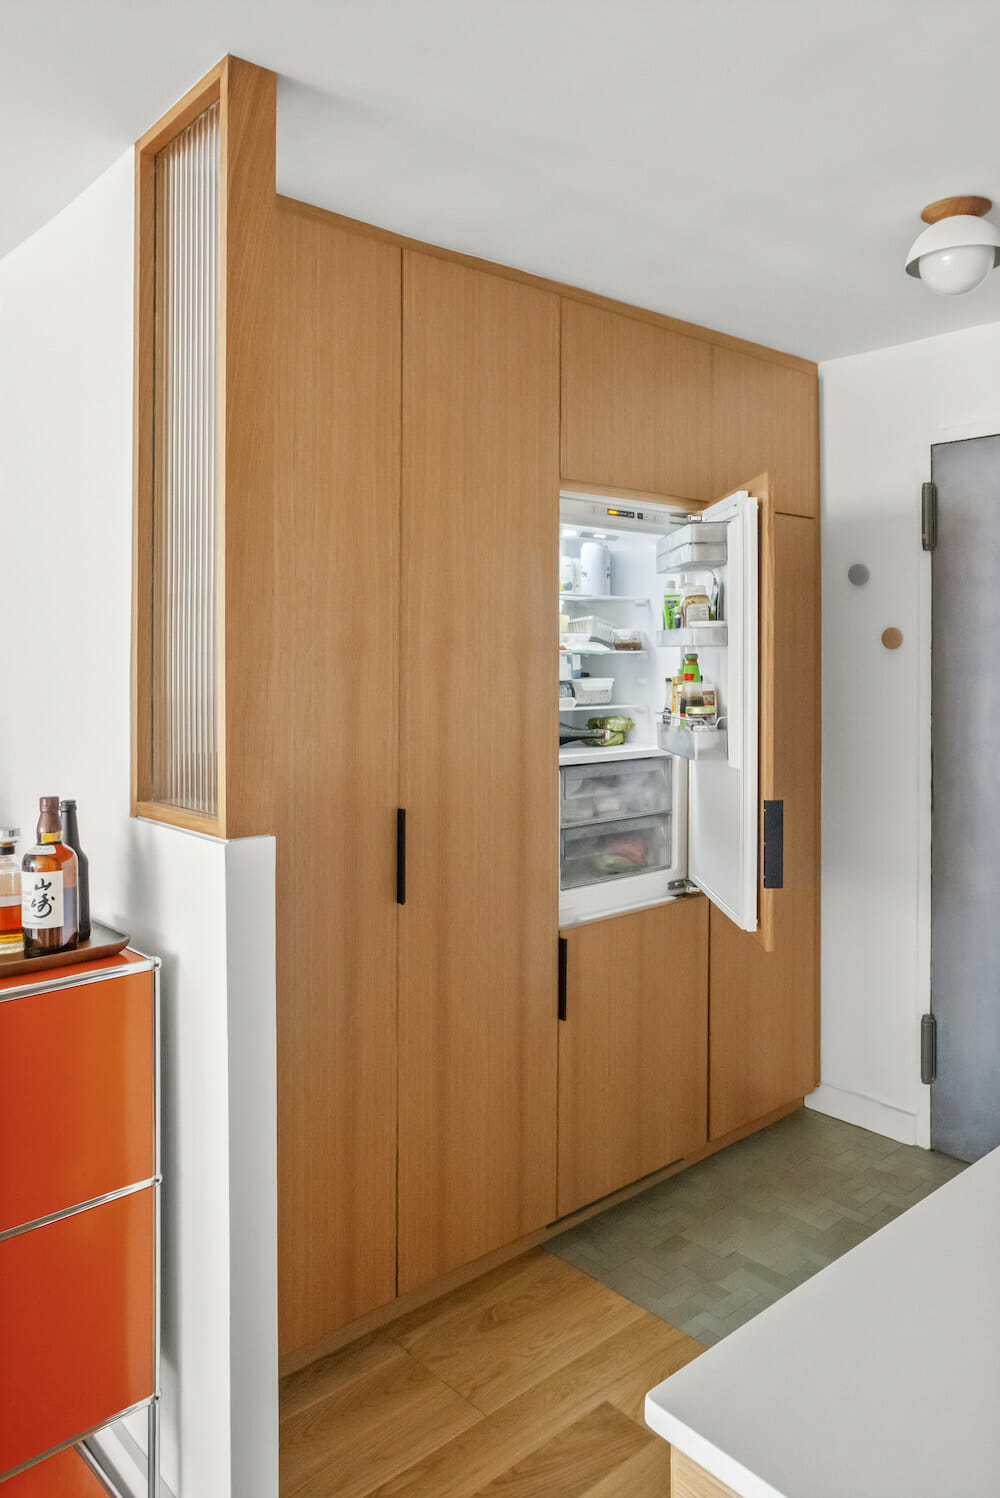 entry with tall cabinet builts in hiding refrigerator